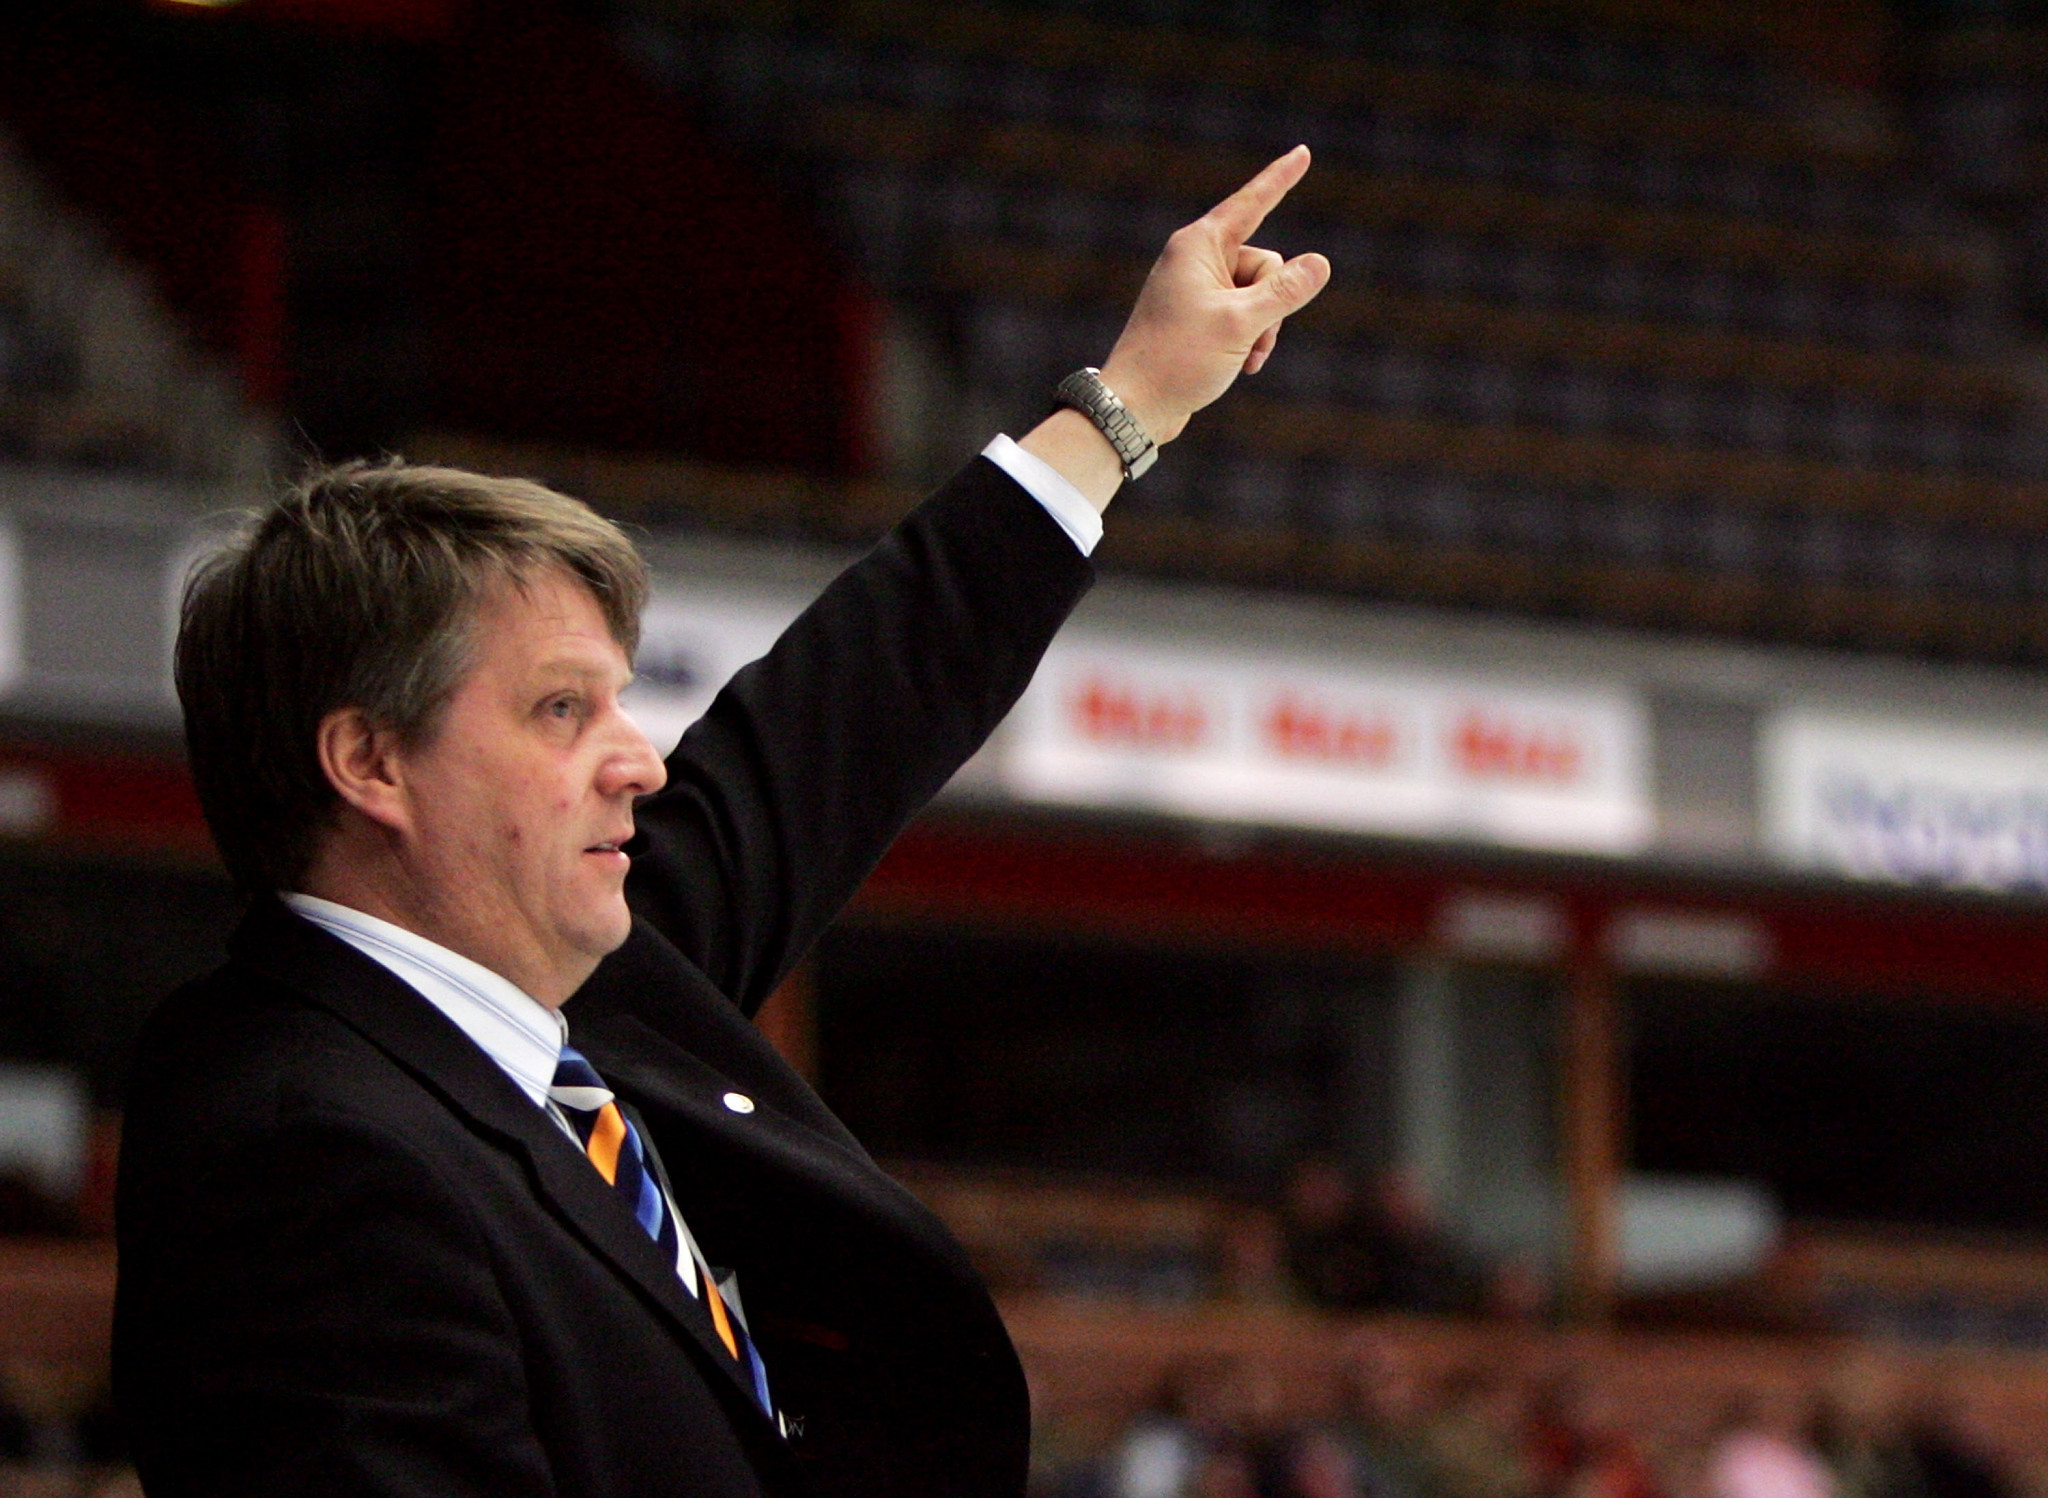 Peter Elander is the new head coach of Denmark's women's team ©Getty Images